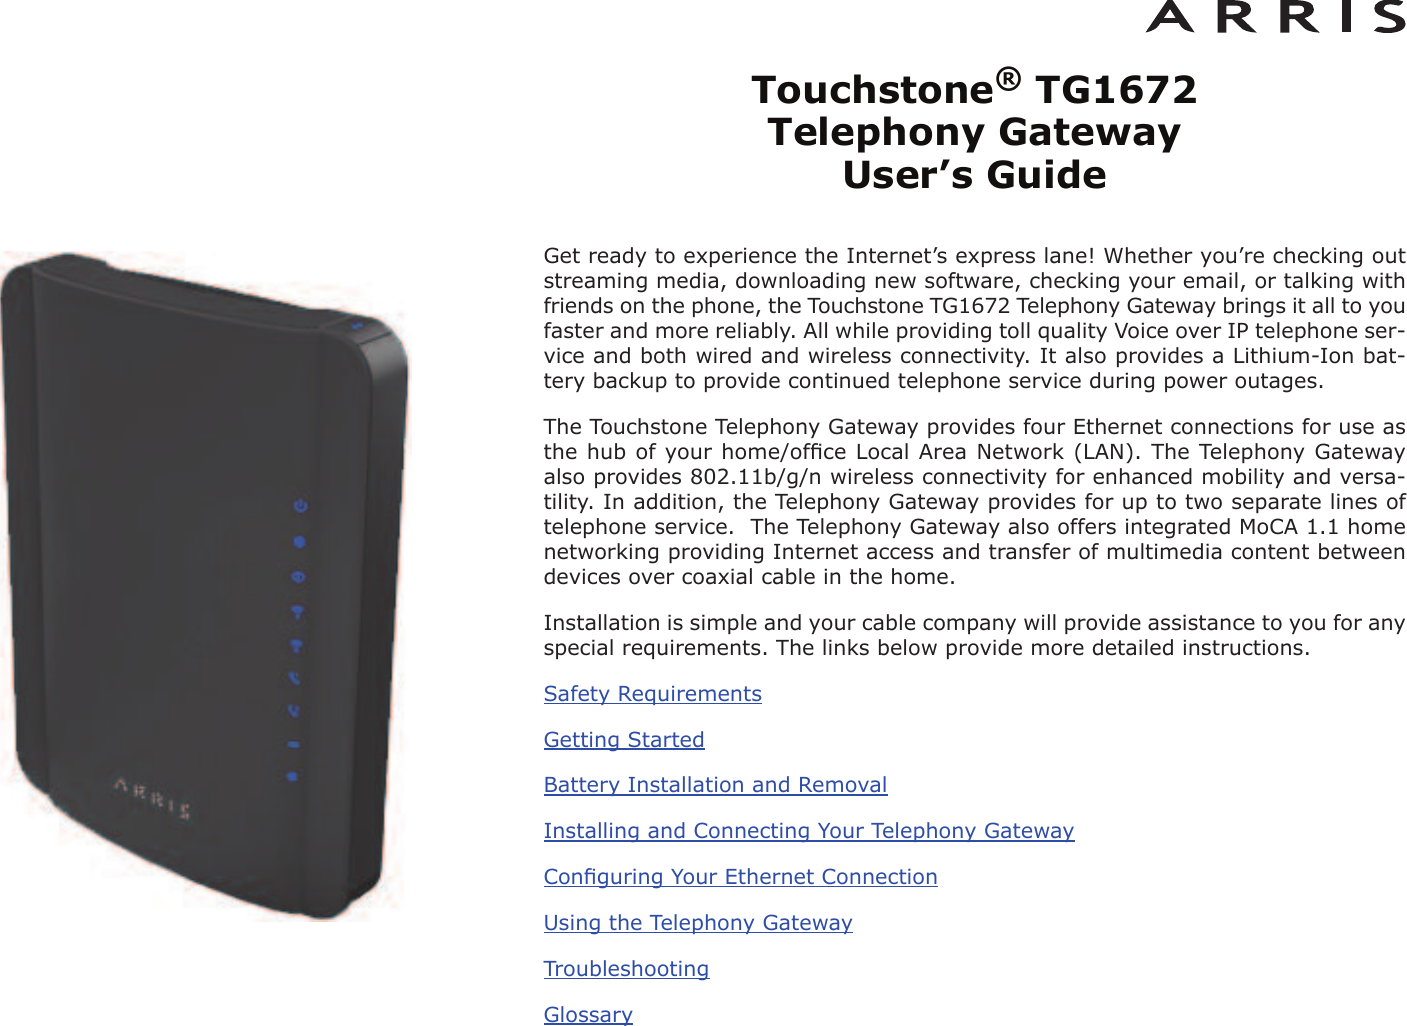 Touchstone®TG1672 Telephony Gateway User’s GuideGet ready to experience the Internet’s express lane! Whether you’re checking outstreaming media, downloading new software, checking your email, or talking withfriends on the phone, the Touchstone TG1672 Telephony Gateway brings it all to youfaster and more reliably. All while providing toll quality Voice over IP telephone ser -vice and both wired and wireless connectivity. It also provides a Lithi um-Ion bat-tery backup to provide continued telephone service during power outages.The Touchstone Telephony Gateway provides four Ethernet connections for use asthe hub of your home/ofﬁce Local Area Network (LAN). The Telephony Gatewayalso provides 802.11b/g/n wireless connectivity for enhanced mobility and versa-tility. In addition, the Telephony Gateway provides for up to two separate lines oftelephone service.  The Telephony Gateway also offers integrated MoCA 1.1 homenetworking providing Internet access and transfer of multimedia content betweendevices over coaxial cable in the home.Installation is simple and your cable company will provide assistance to you for anyspecial requirements. The links below provide more detailed instructions.Safety RequirementsGetting StartedBattery Installation and RemovalInstalling and Connecting Your Telephony GatewayConﬁguring Your Ethernet ConnectionUsing the Telephony GatewayTroubleshootingGlossary